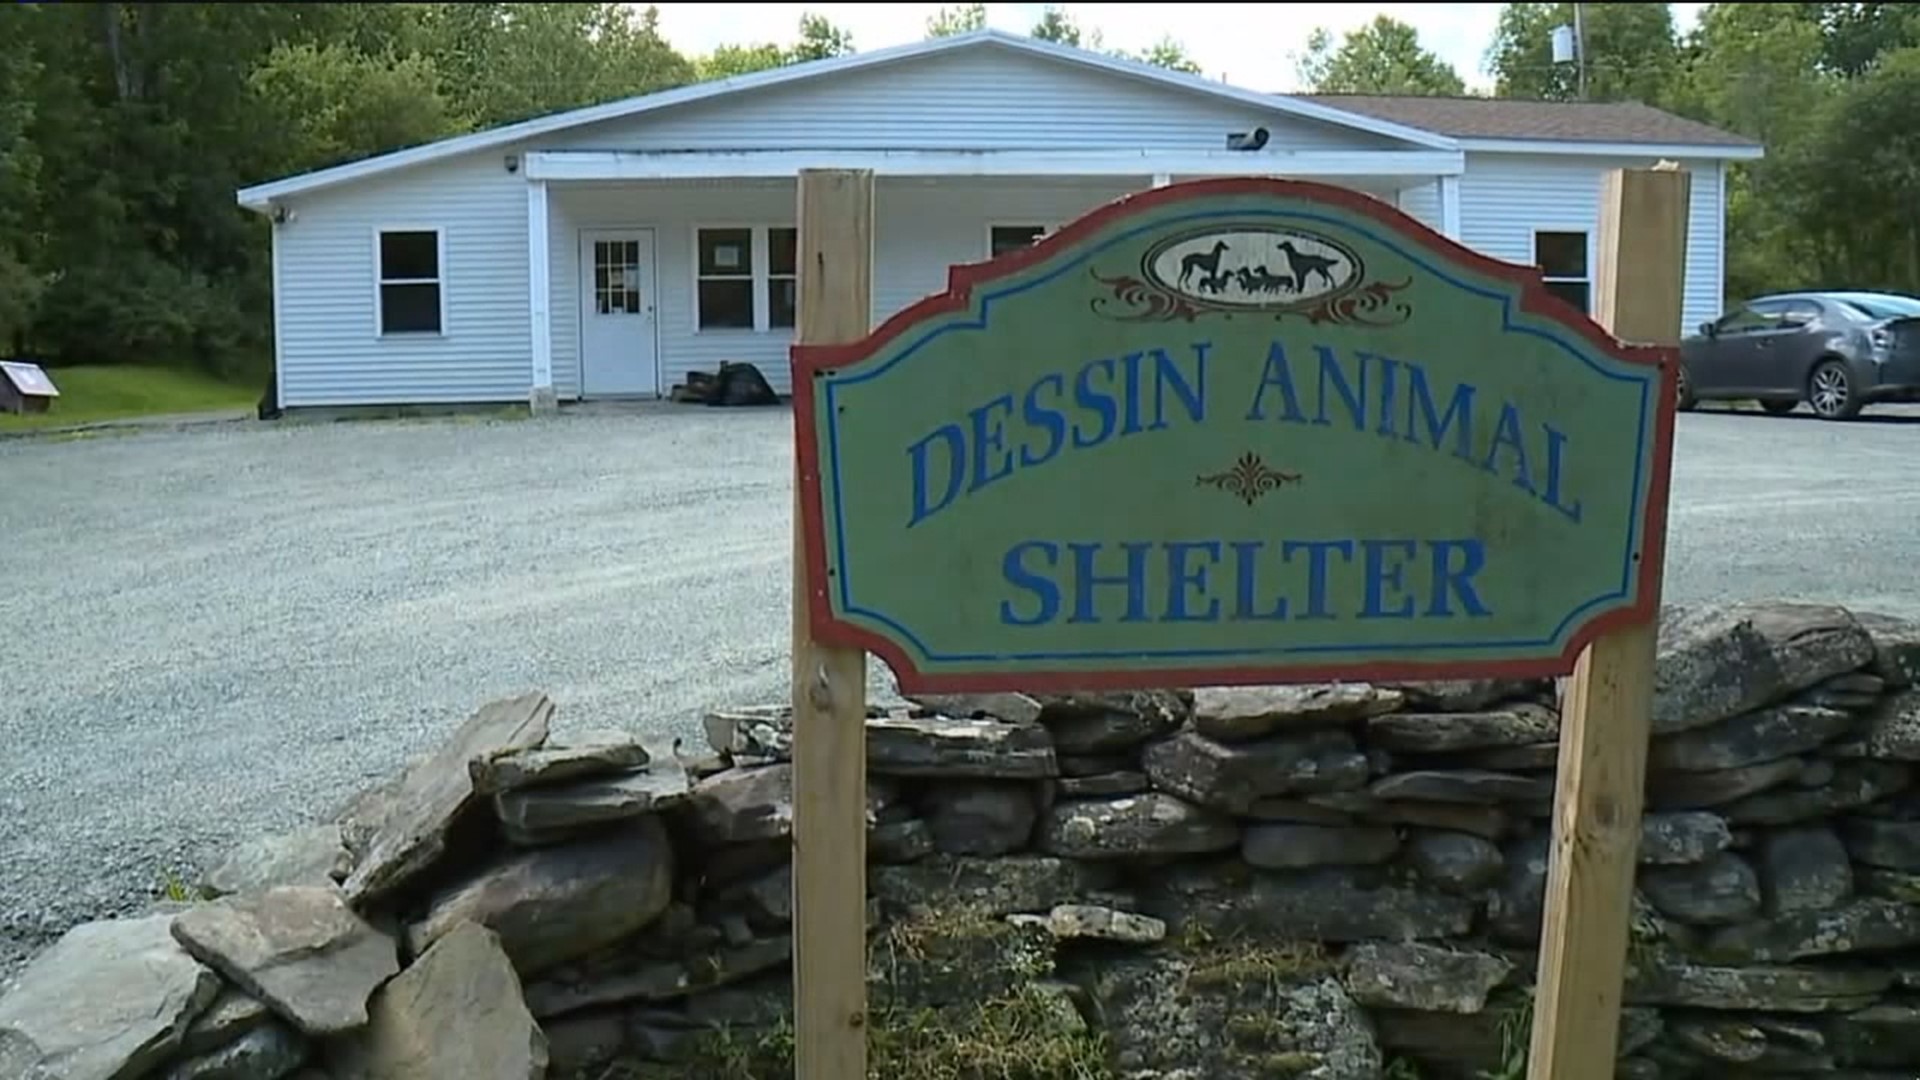 The shelter cannot accept any more animals according to a post on their social media.